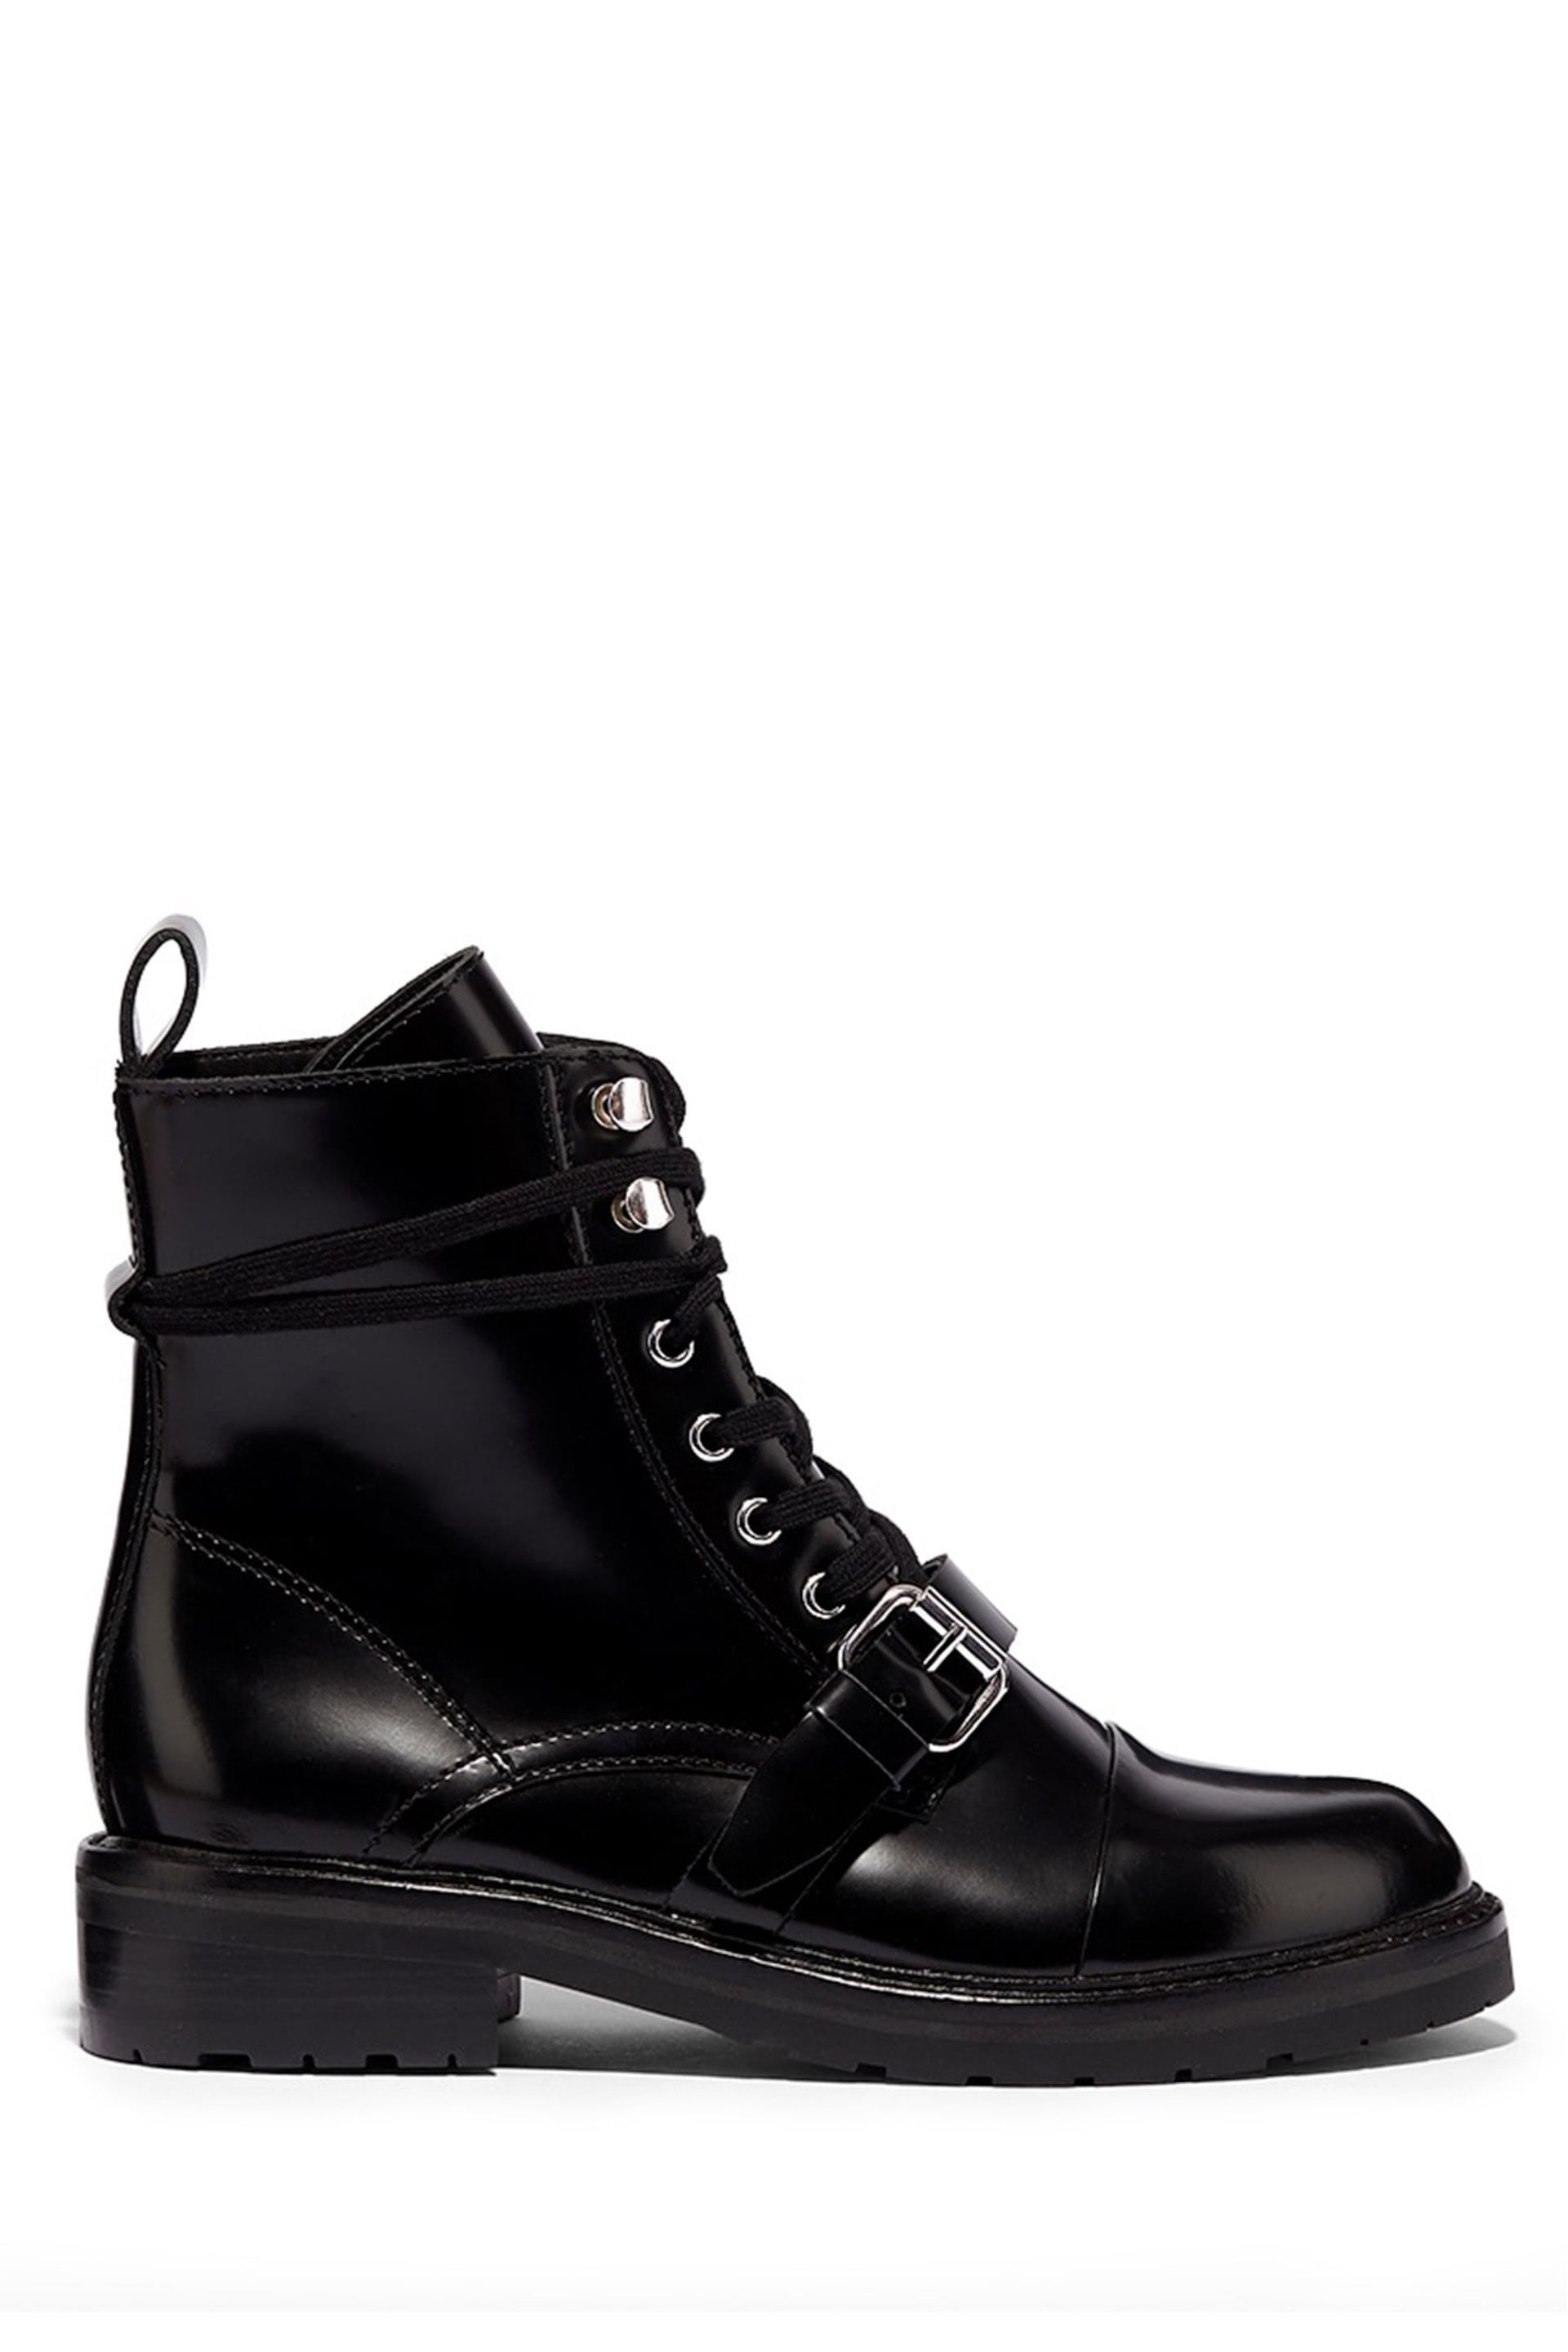 AllSaints Black Donita Ankle Calf Boots - Image 1 of 2